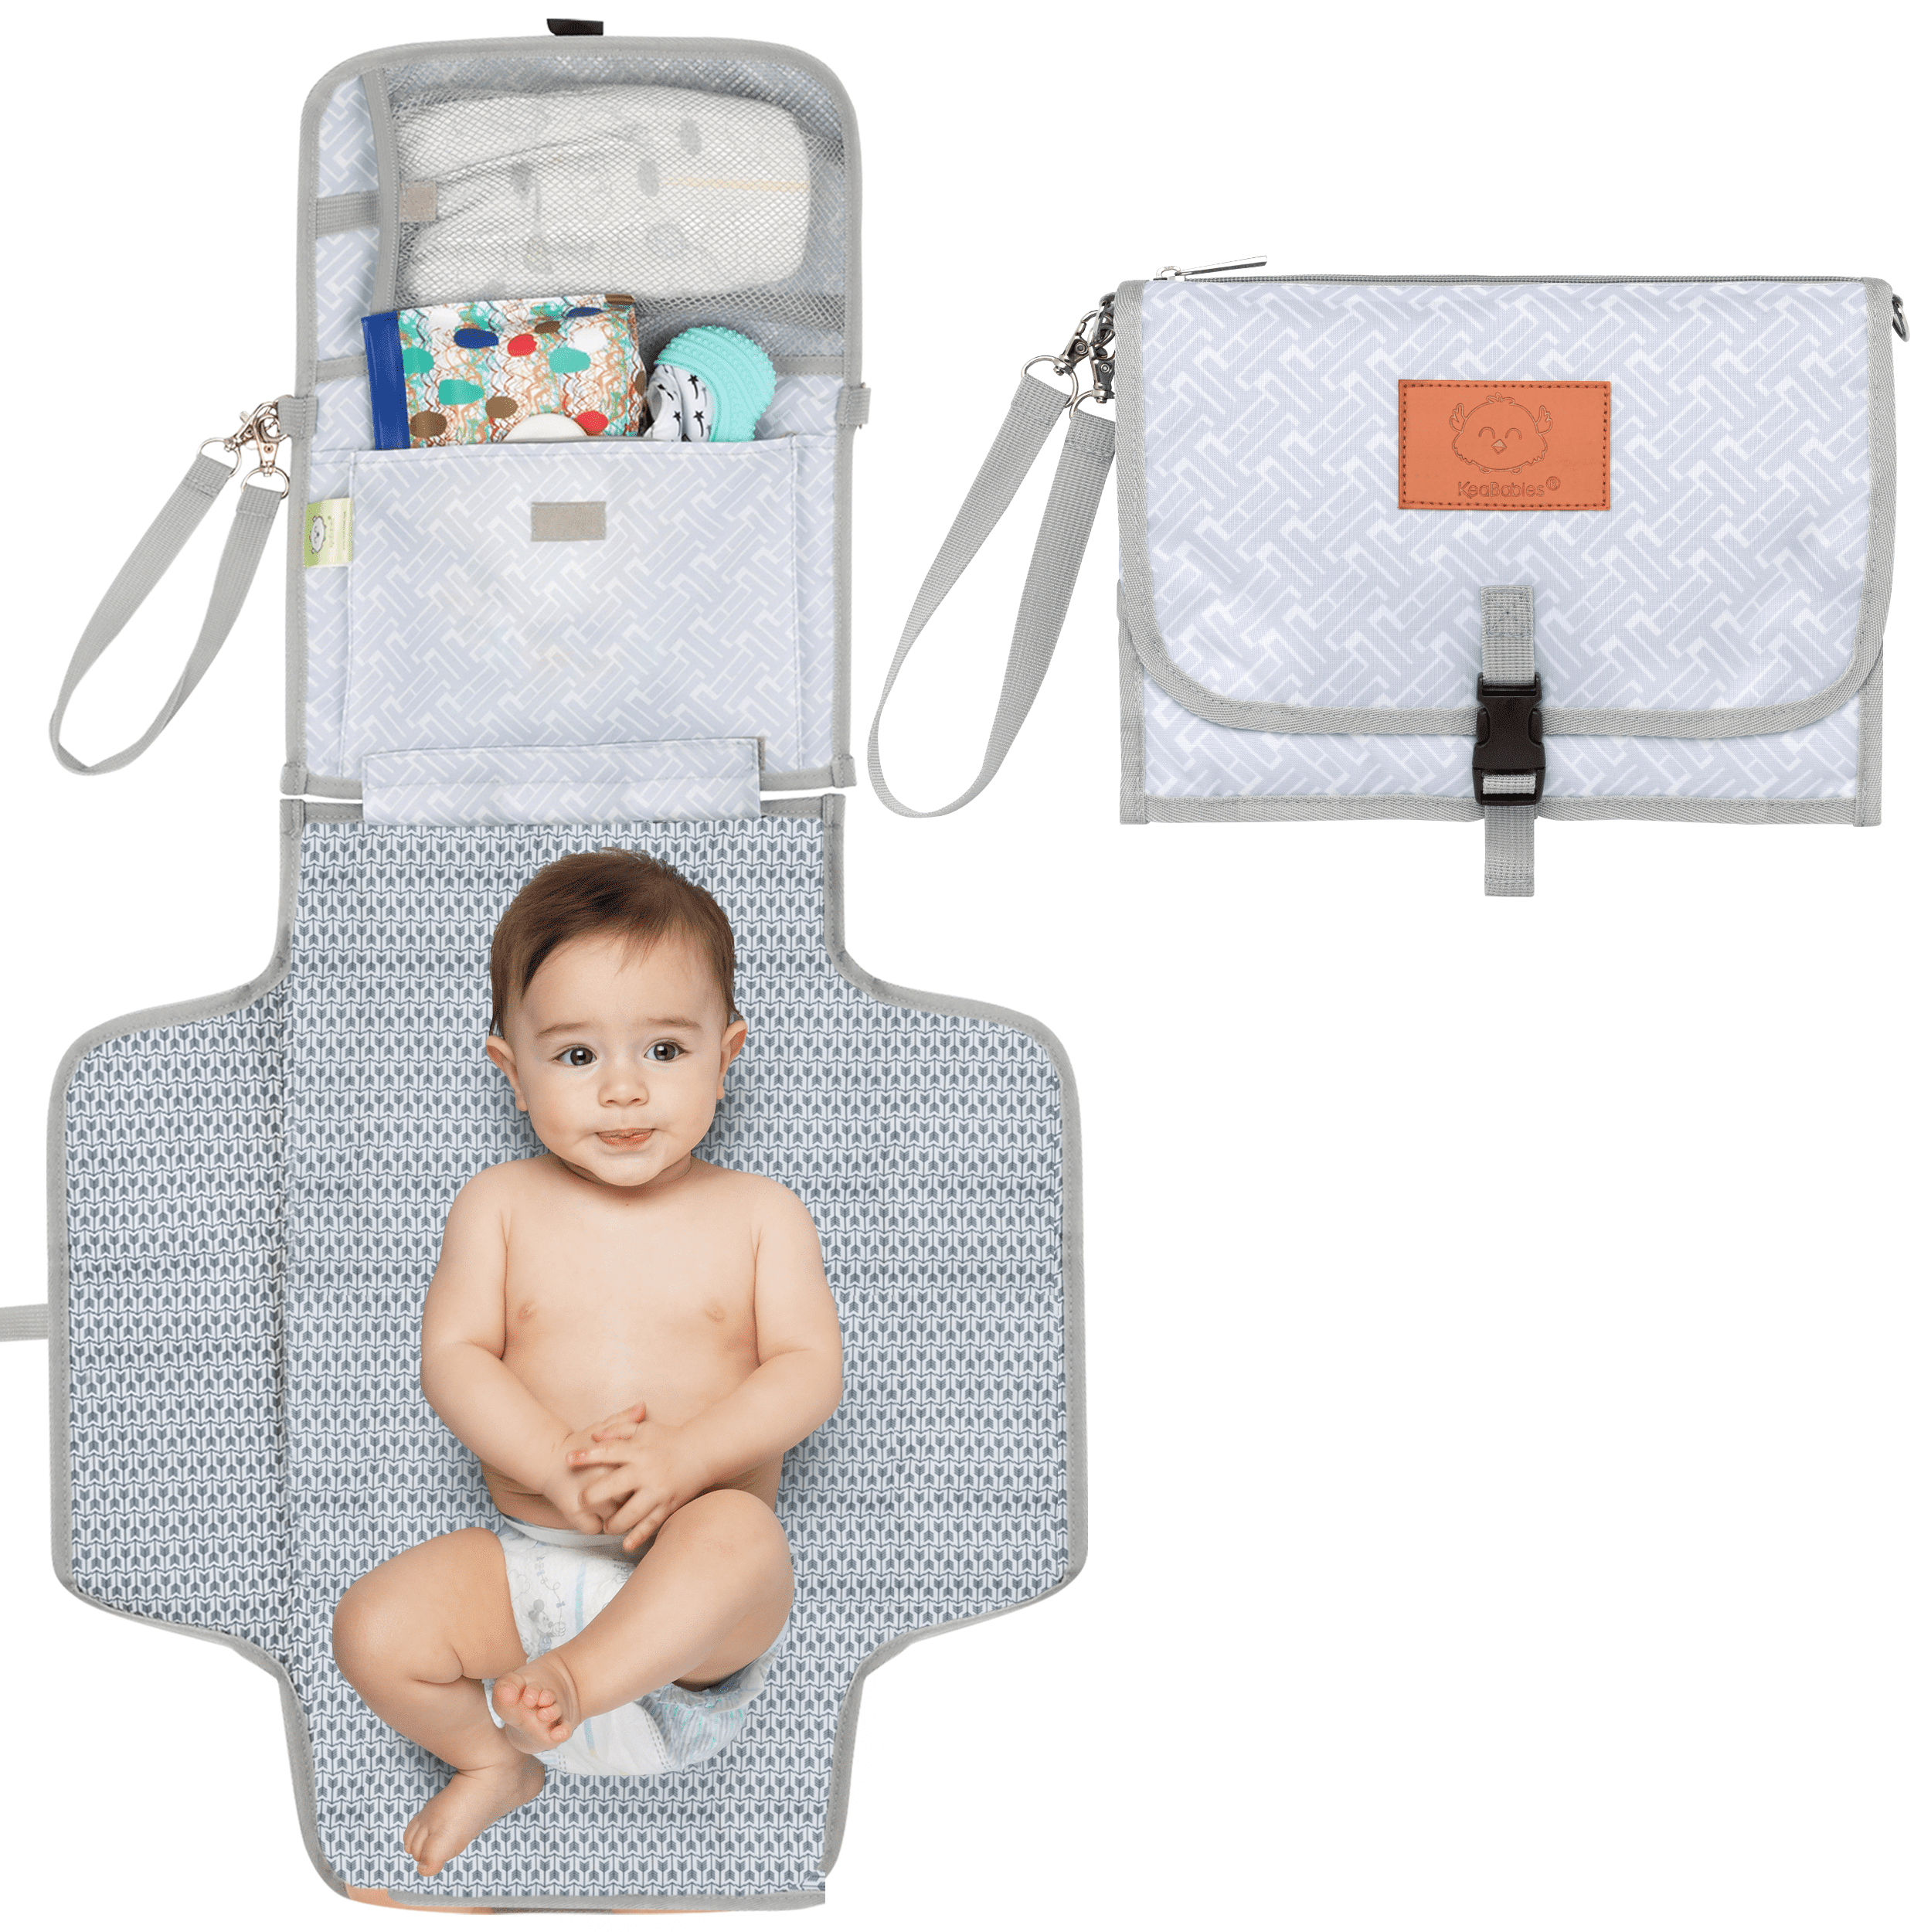 Wipeable Lightweight Travel Nappy Bag Diapper Changing Pad for Infant Toddlers Great Gift Baby Changing Mat Portable Nappy Changing Mat Waterproof